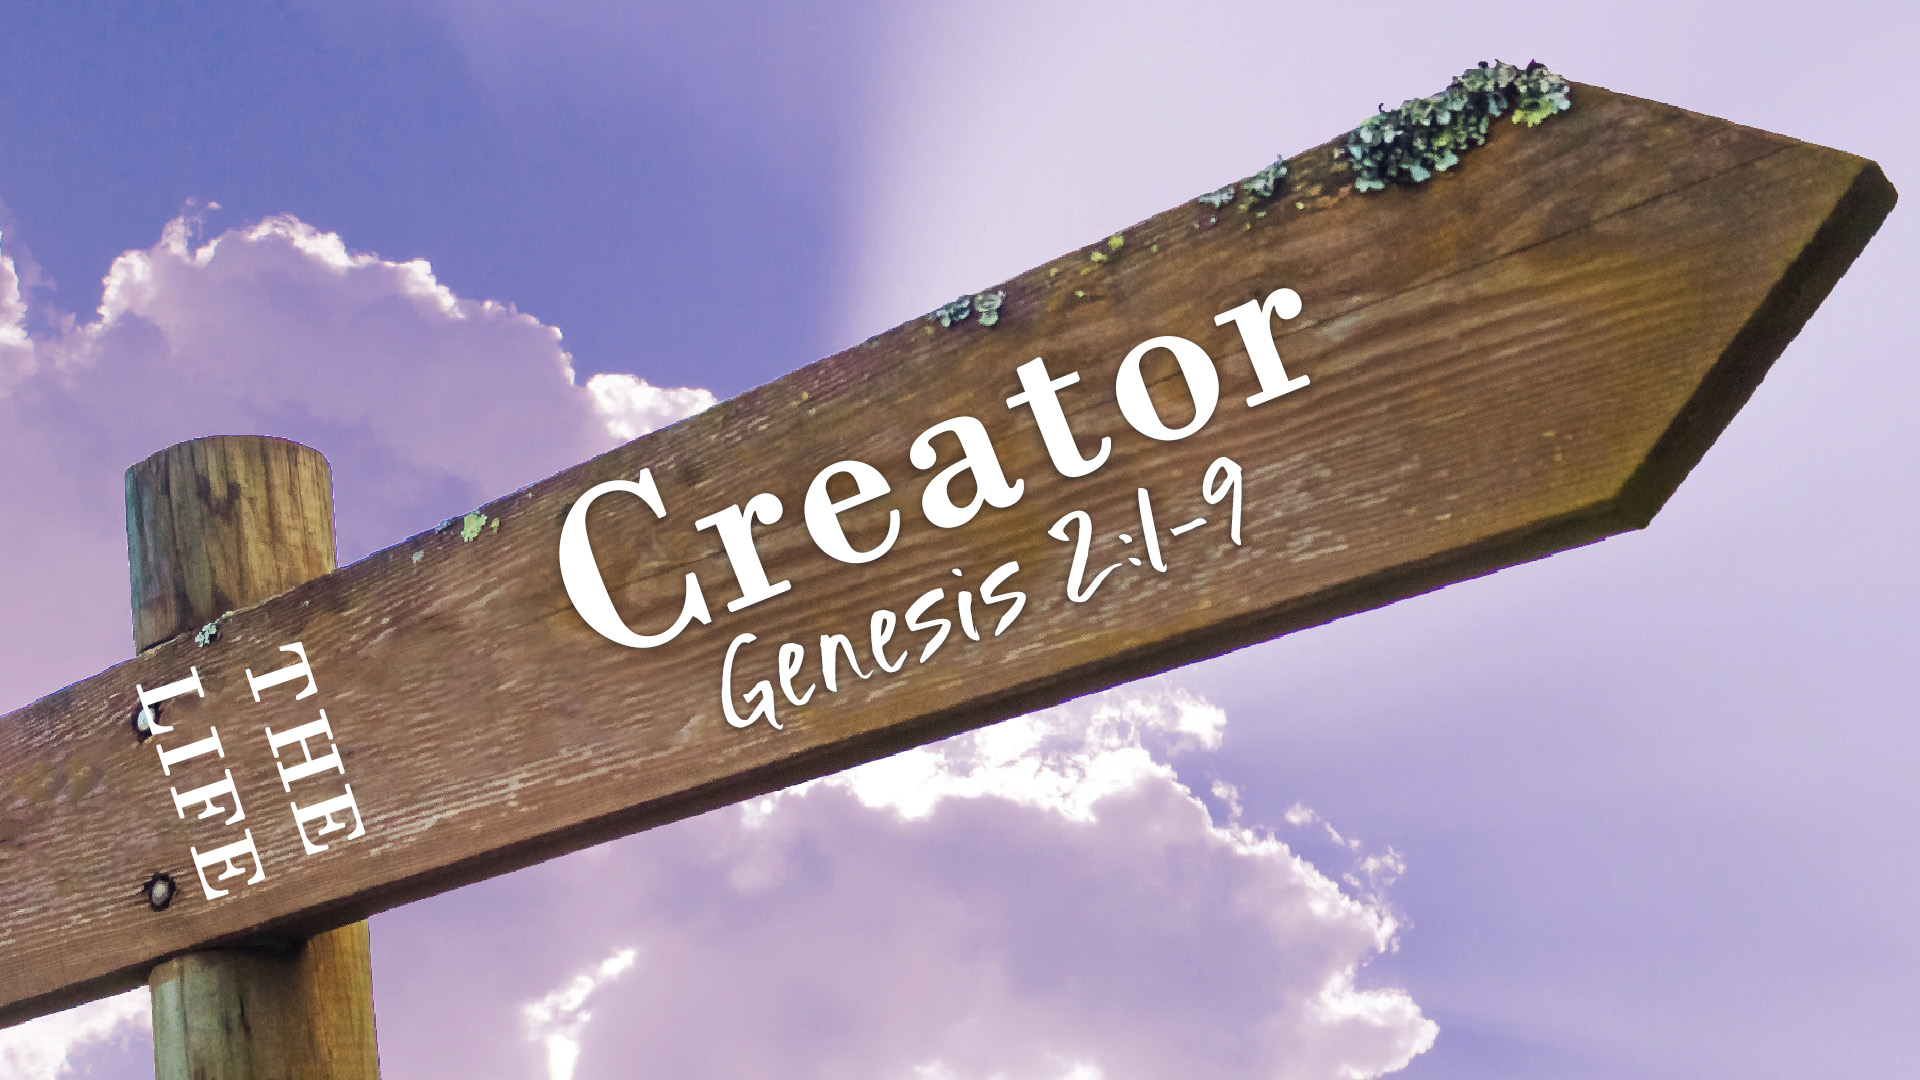 The Life, part 1: Creator  Image